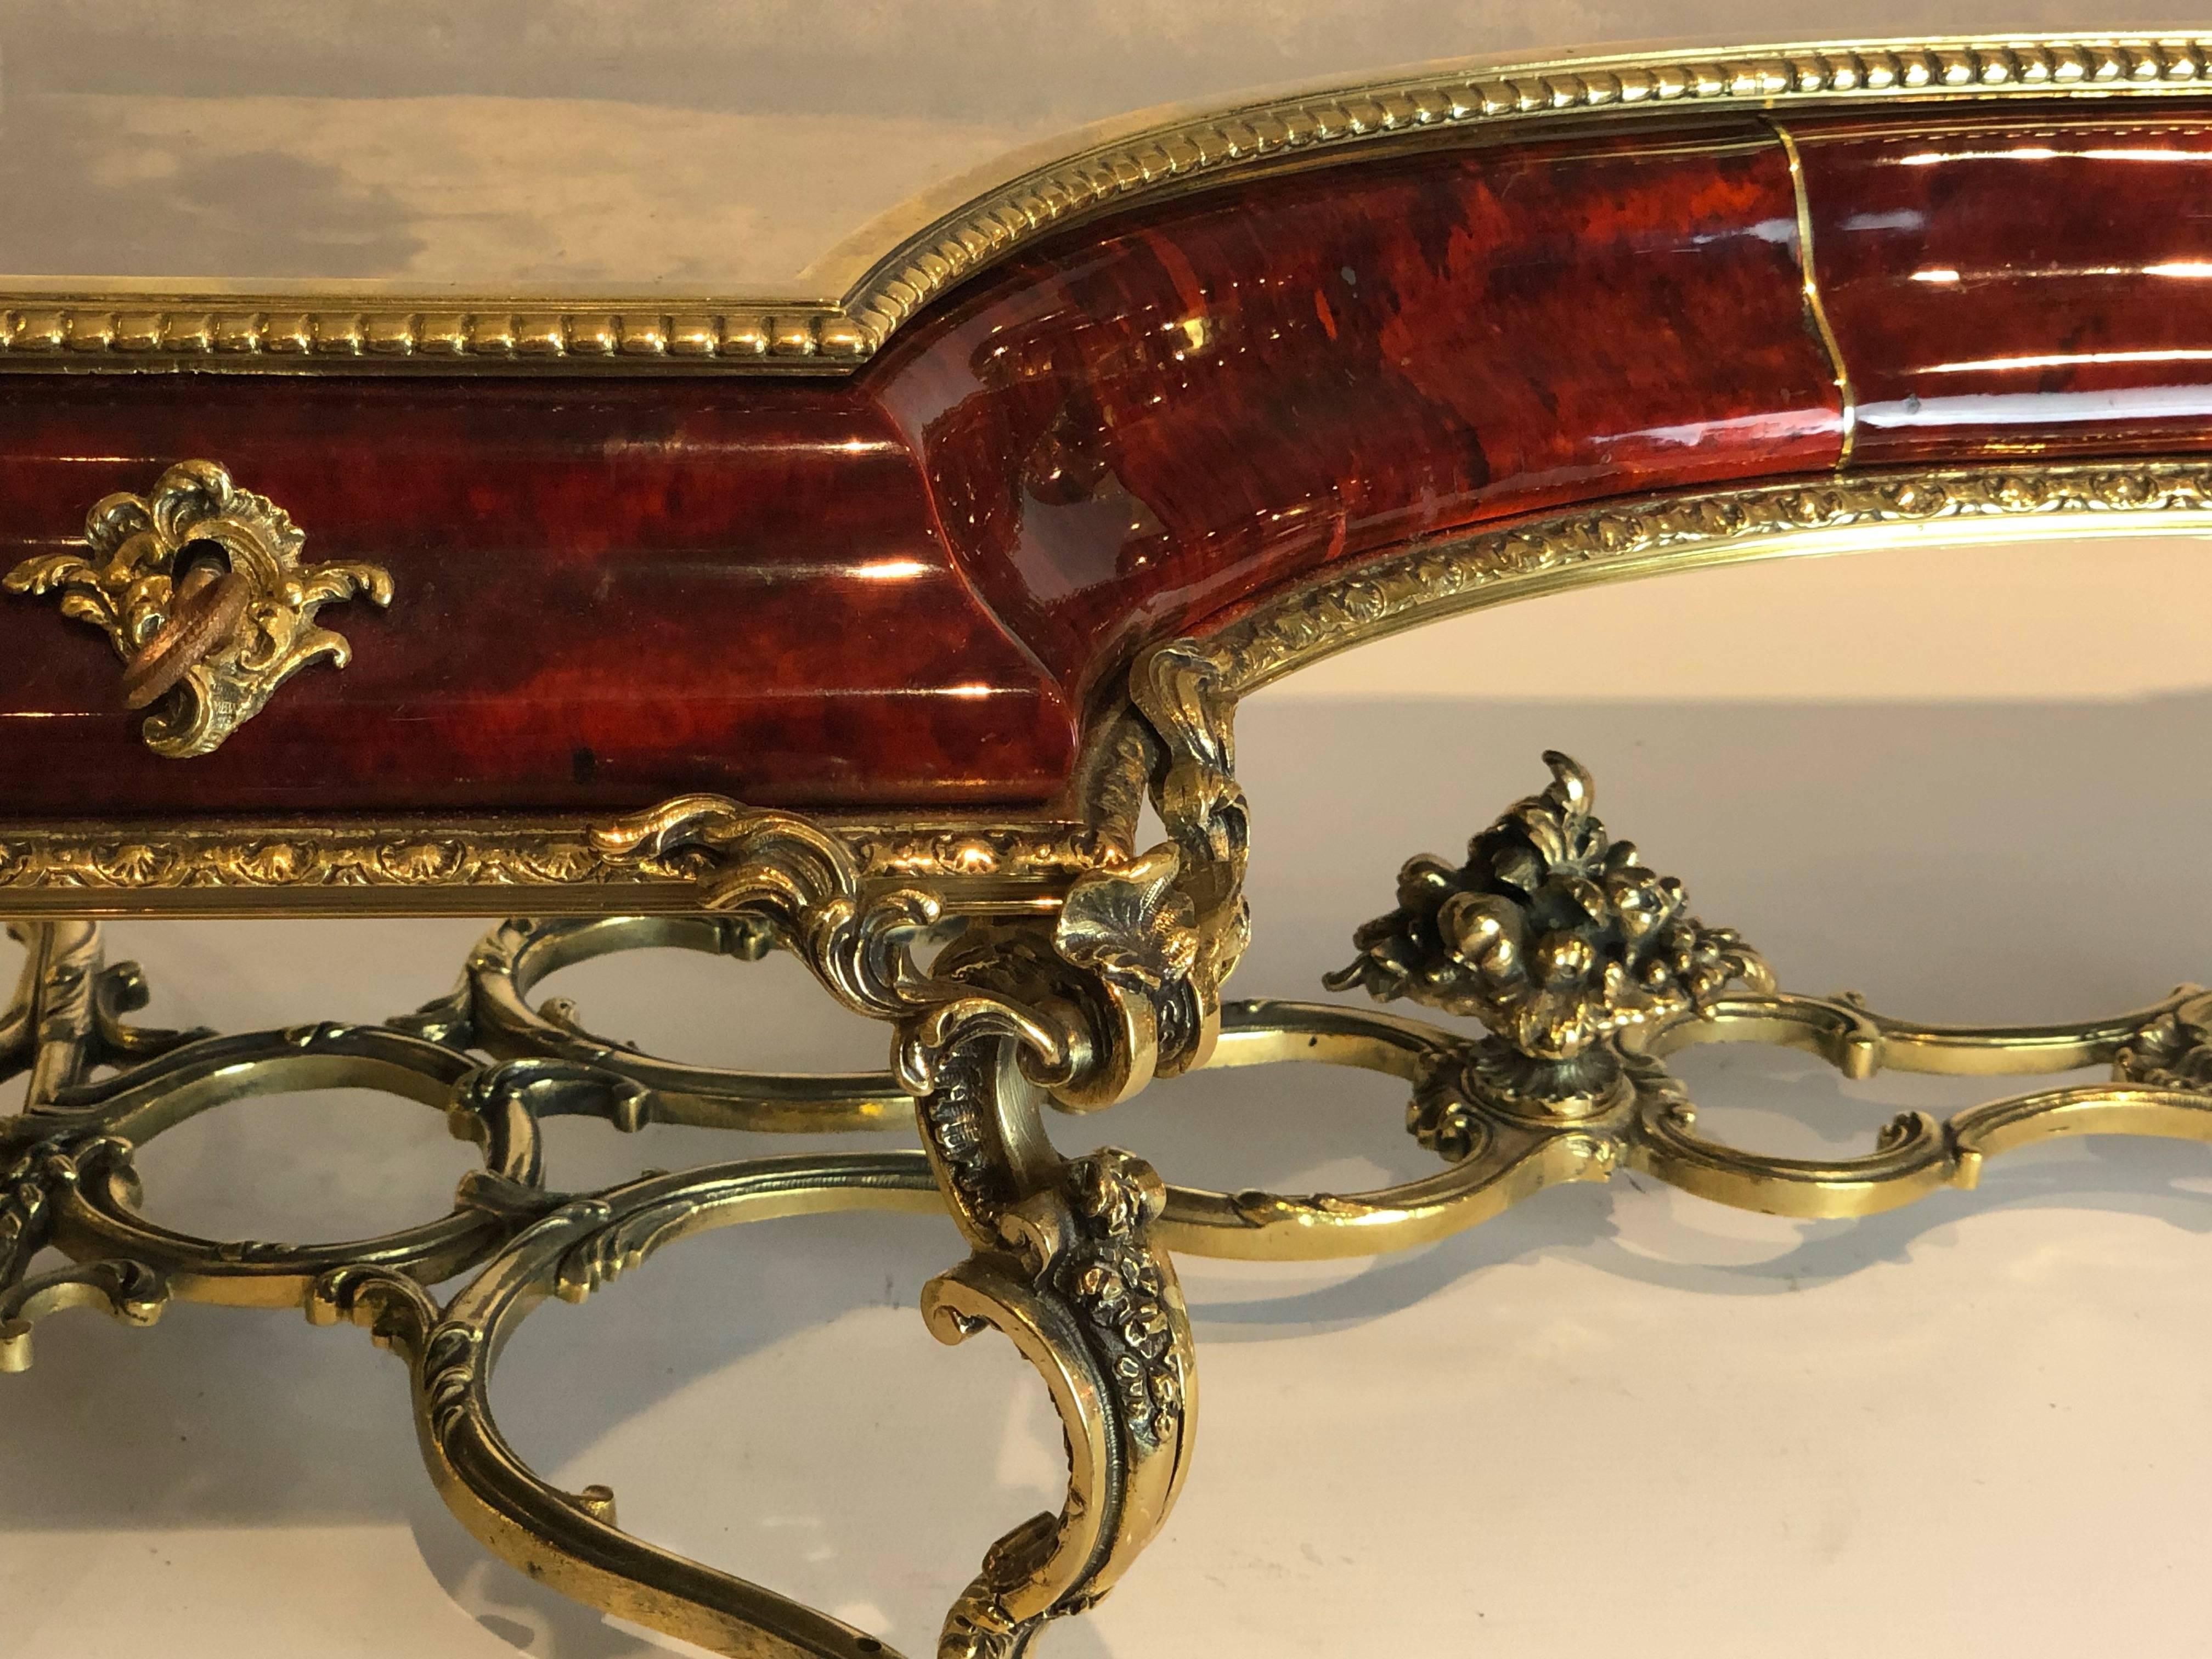 A 19th century French faux tortoise shell table top vitrine in the form of a grand piano with gilt bronze mounts, superb quality.

Unusually large for this type of Bijoux table or Vitrine

Measures 54cm wide by 20cm high by 30cm deep

circa